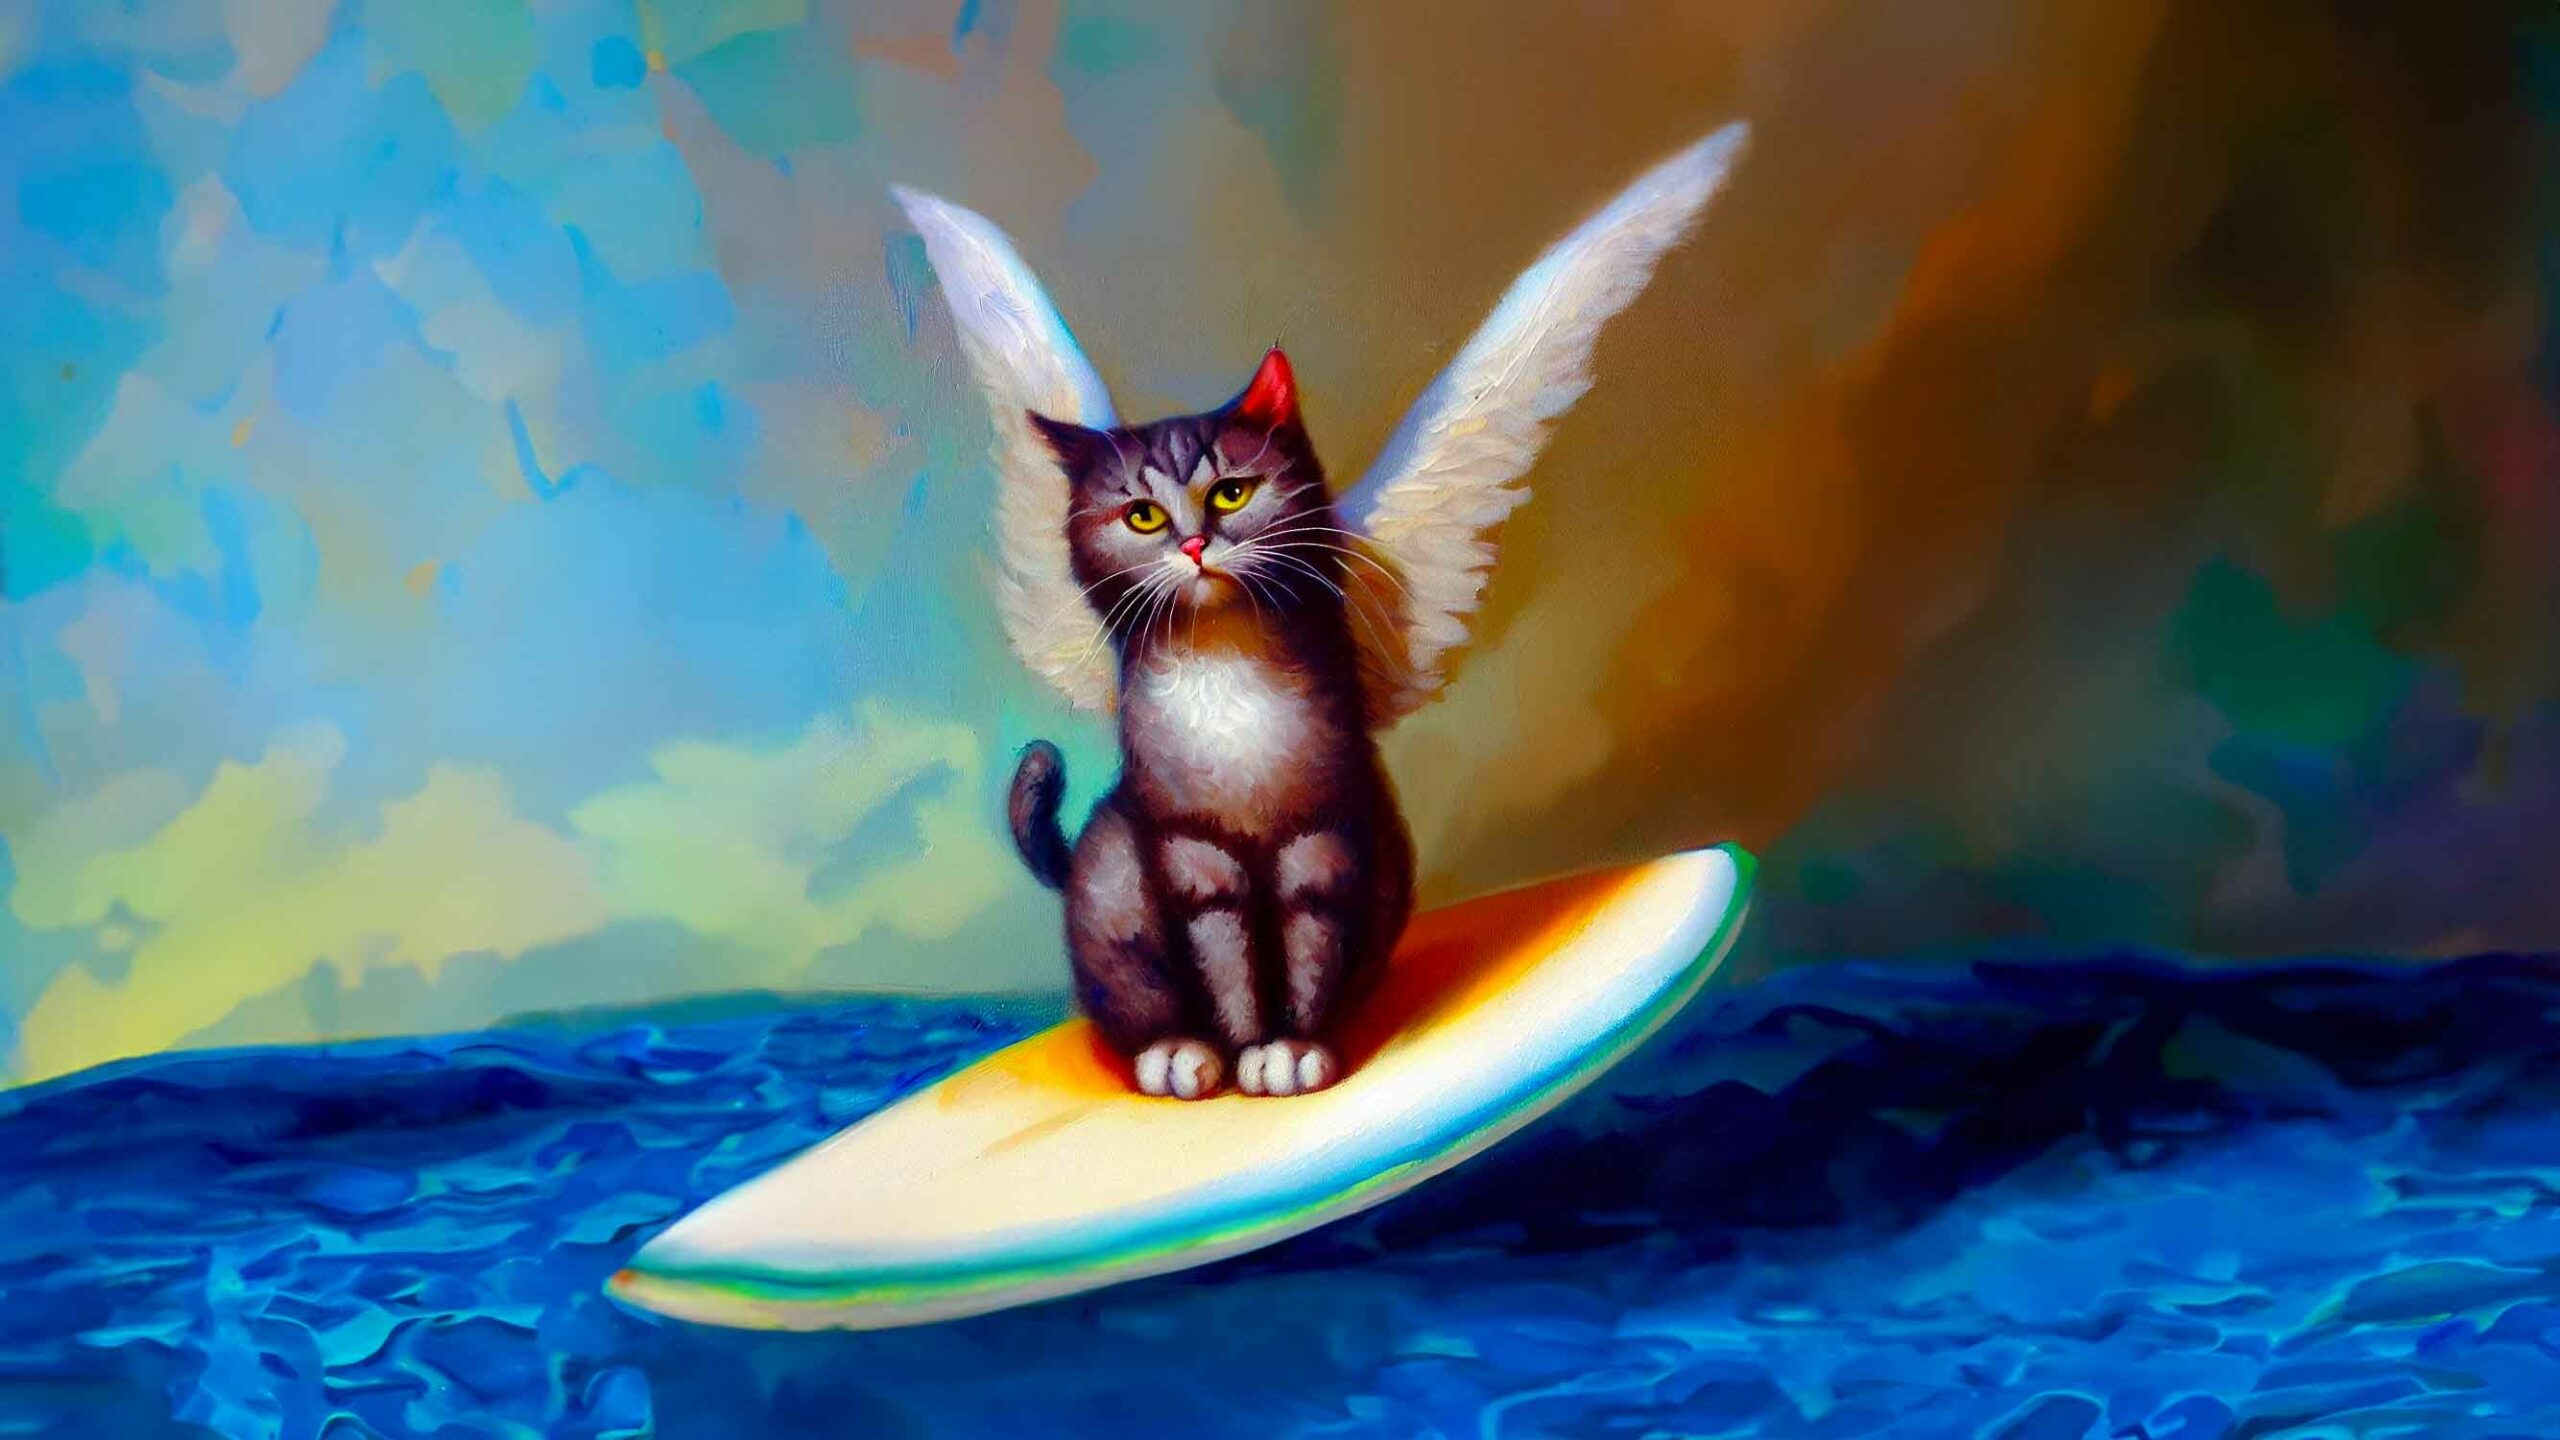 A Cat Surfer Gracefully Balancing On A Surfboard, With Wings Gracefully Spread.